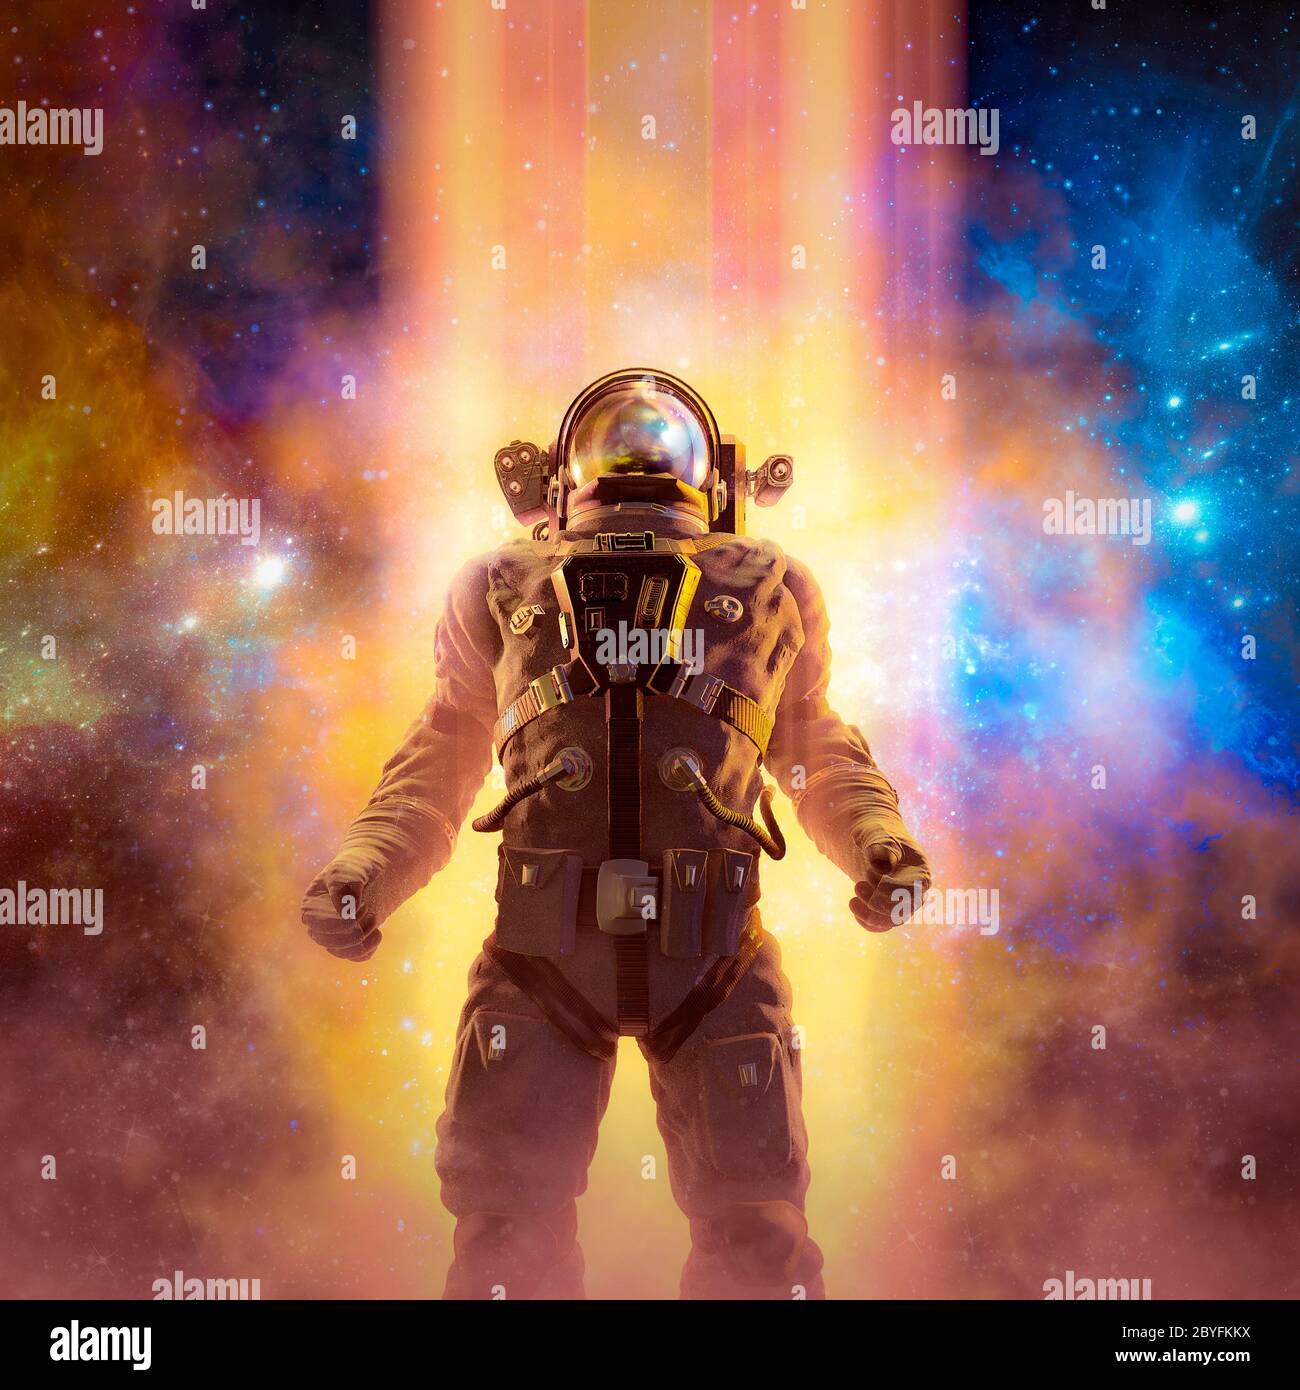 Journey to the stars / 3D illustration of science fiction scene with heroic astronaut silhouetted against light beams in outer space Stock Photo